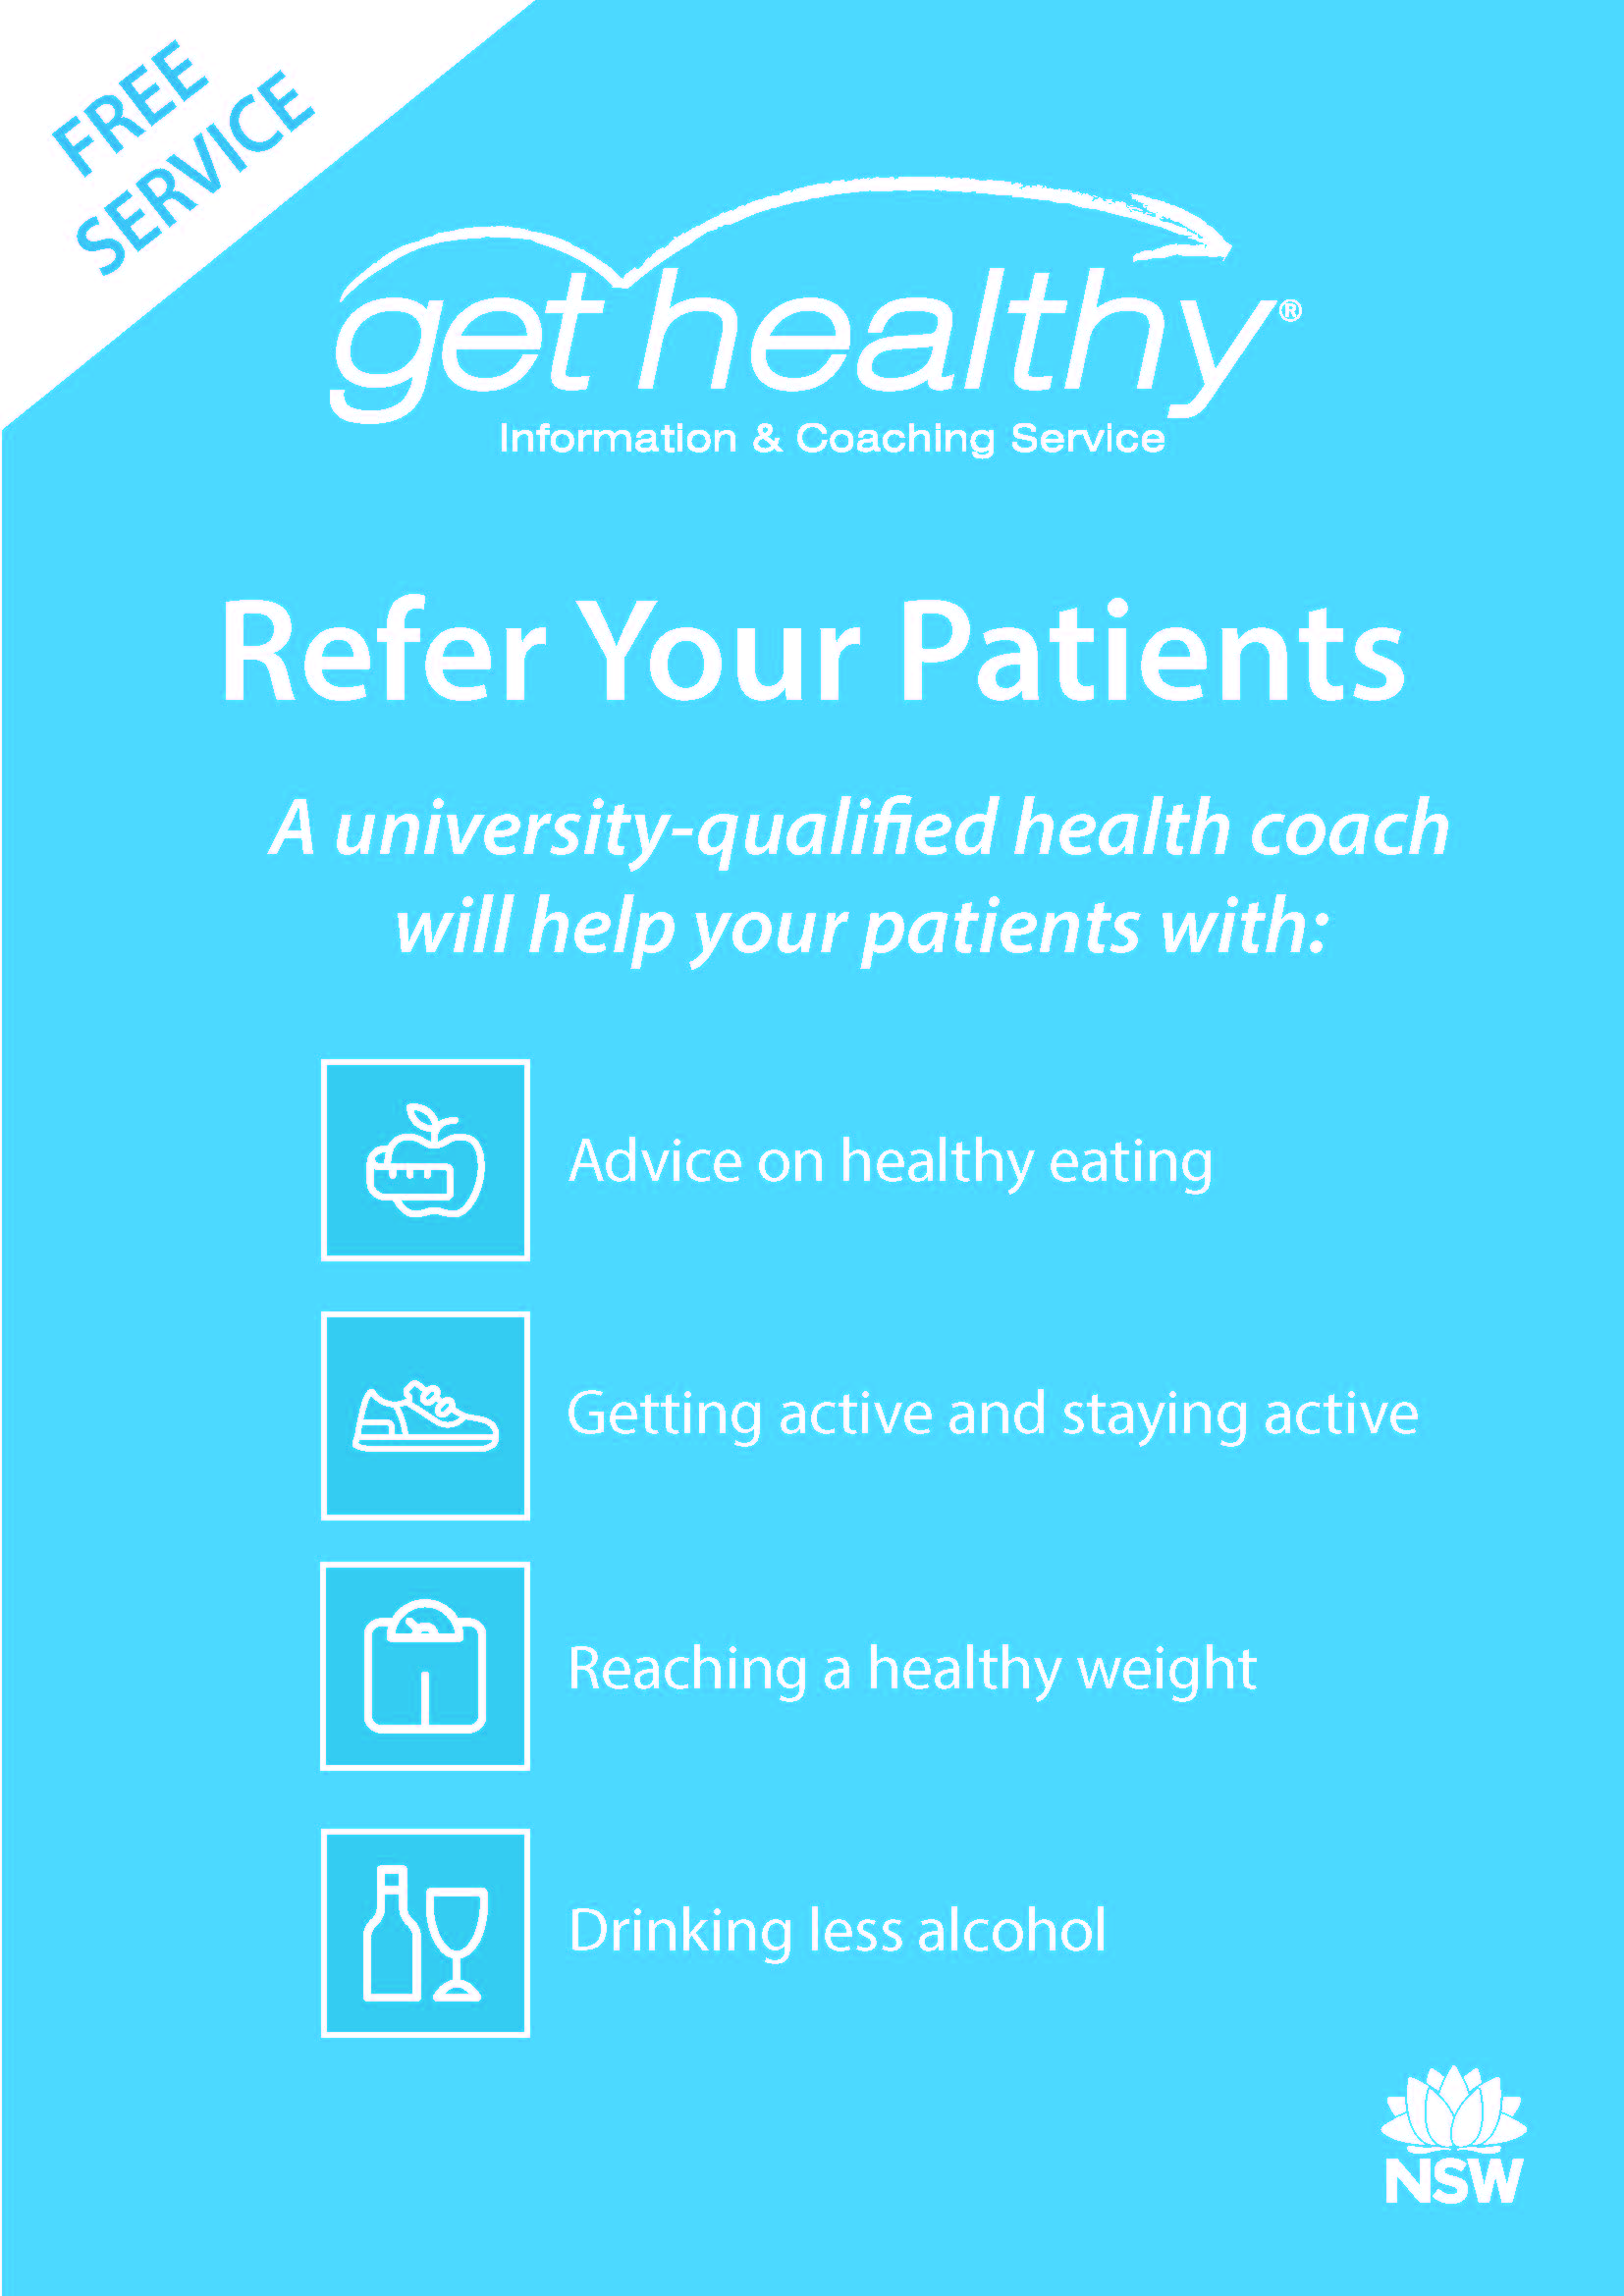 Get Healthy Service - refer your patients